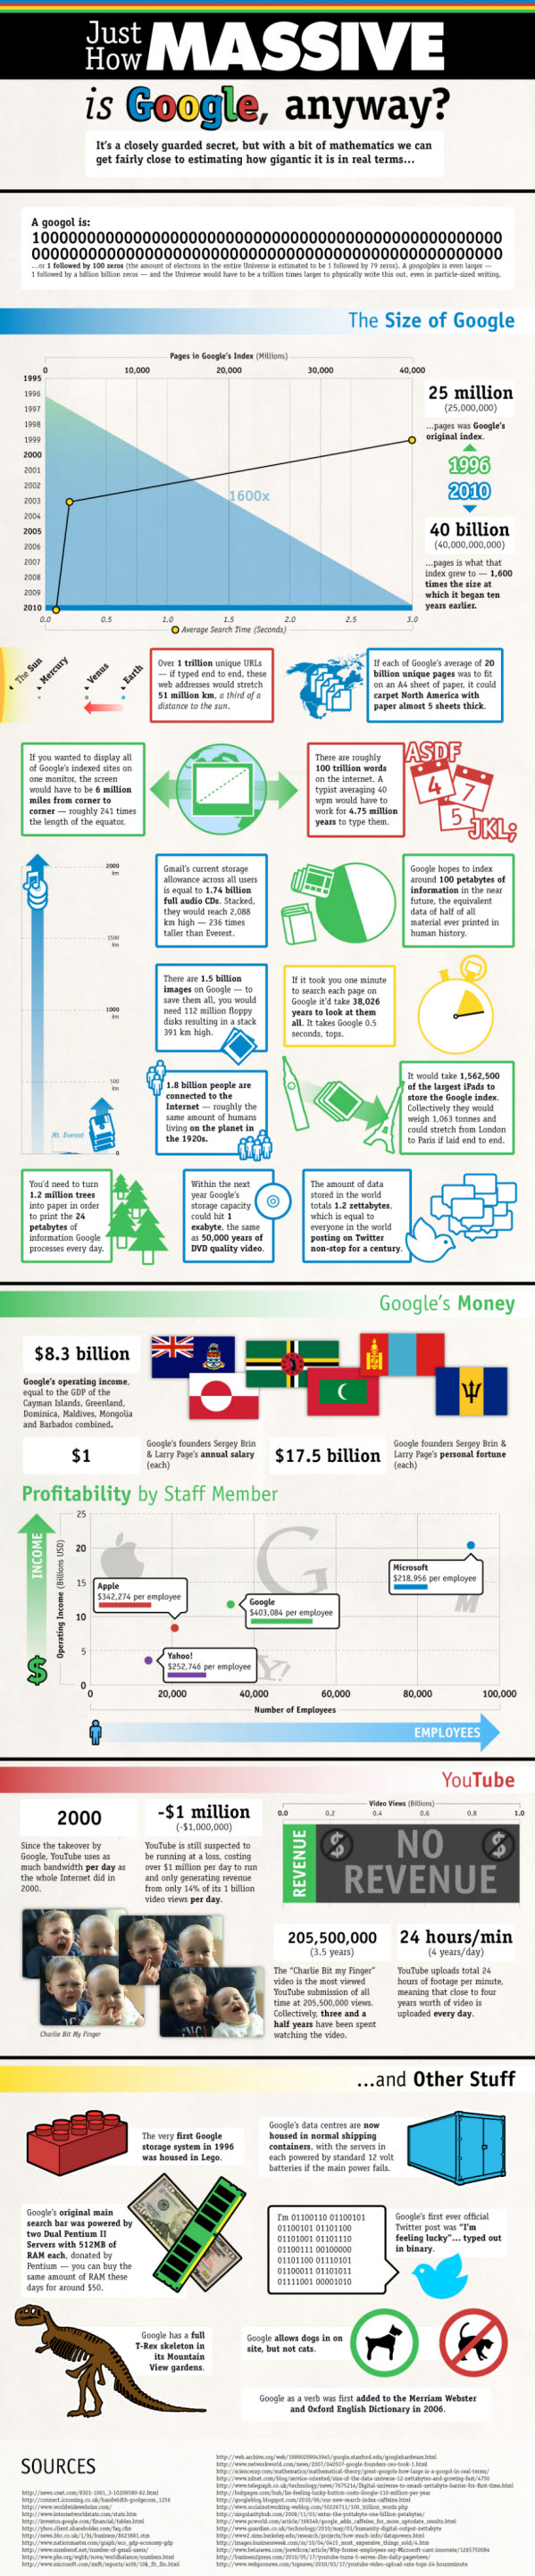 Google by the numbers.